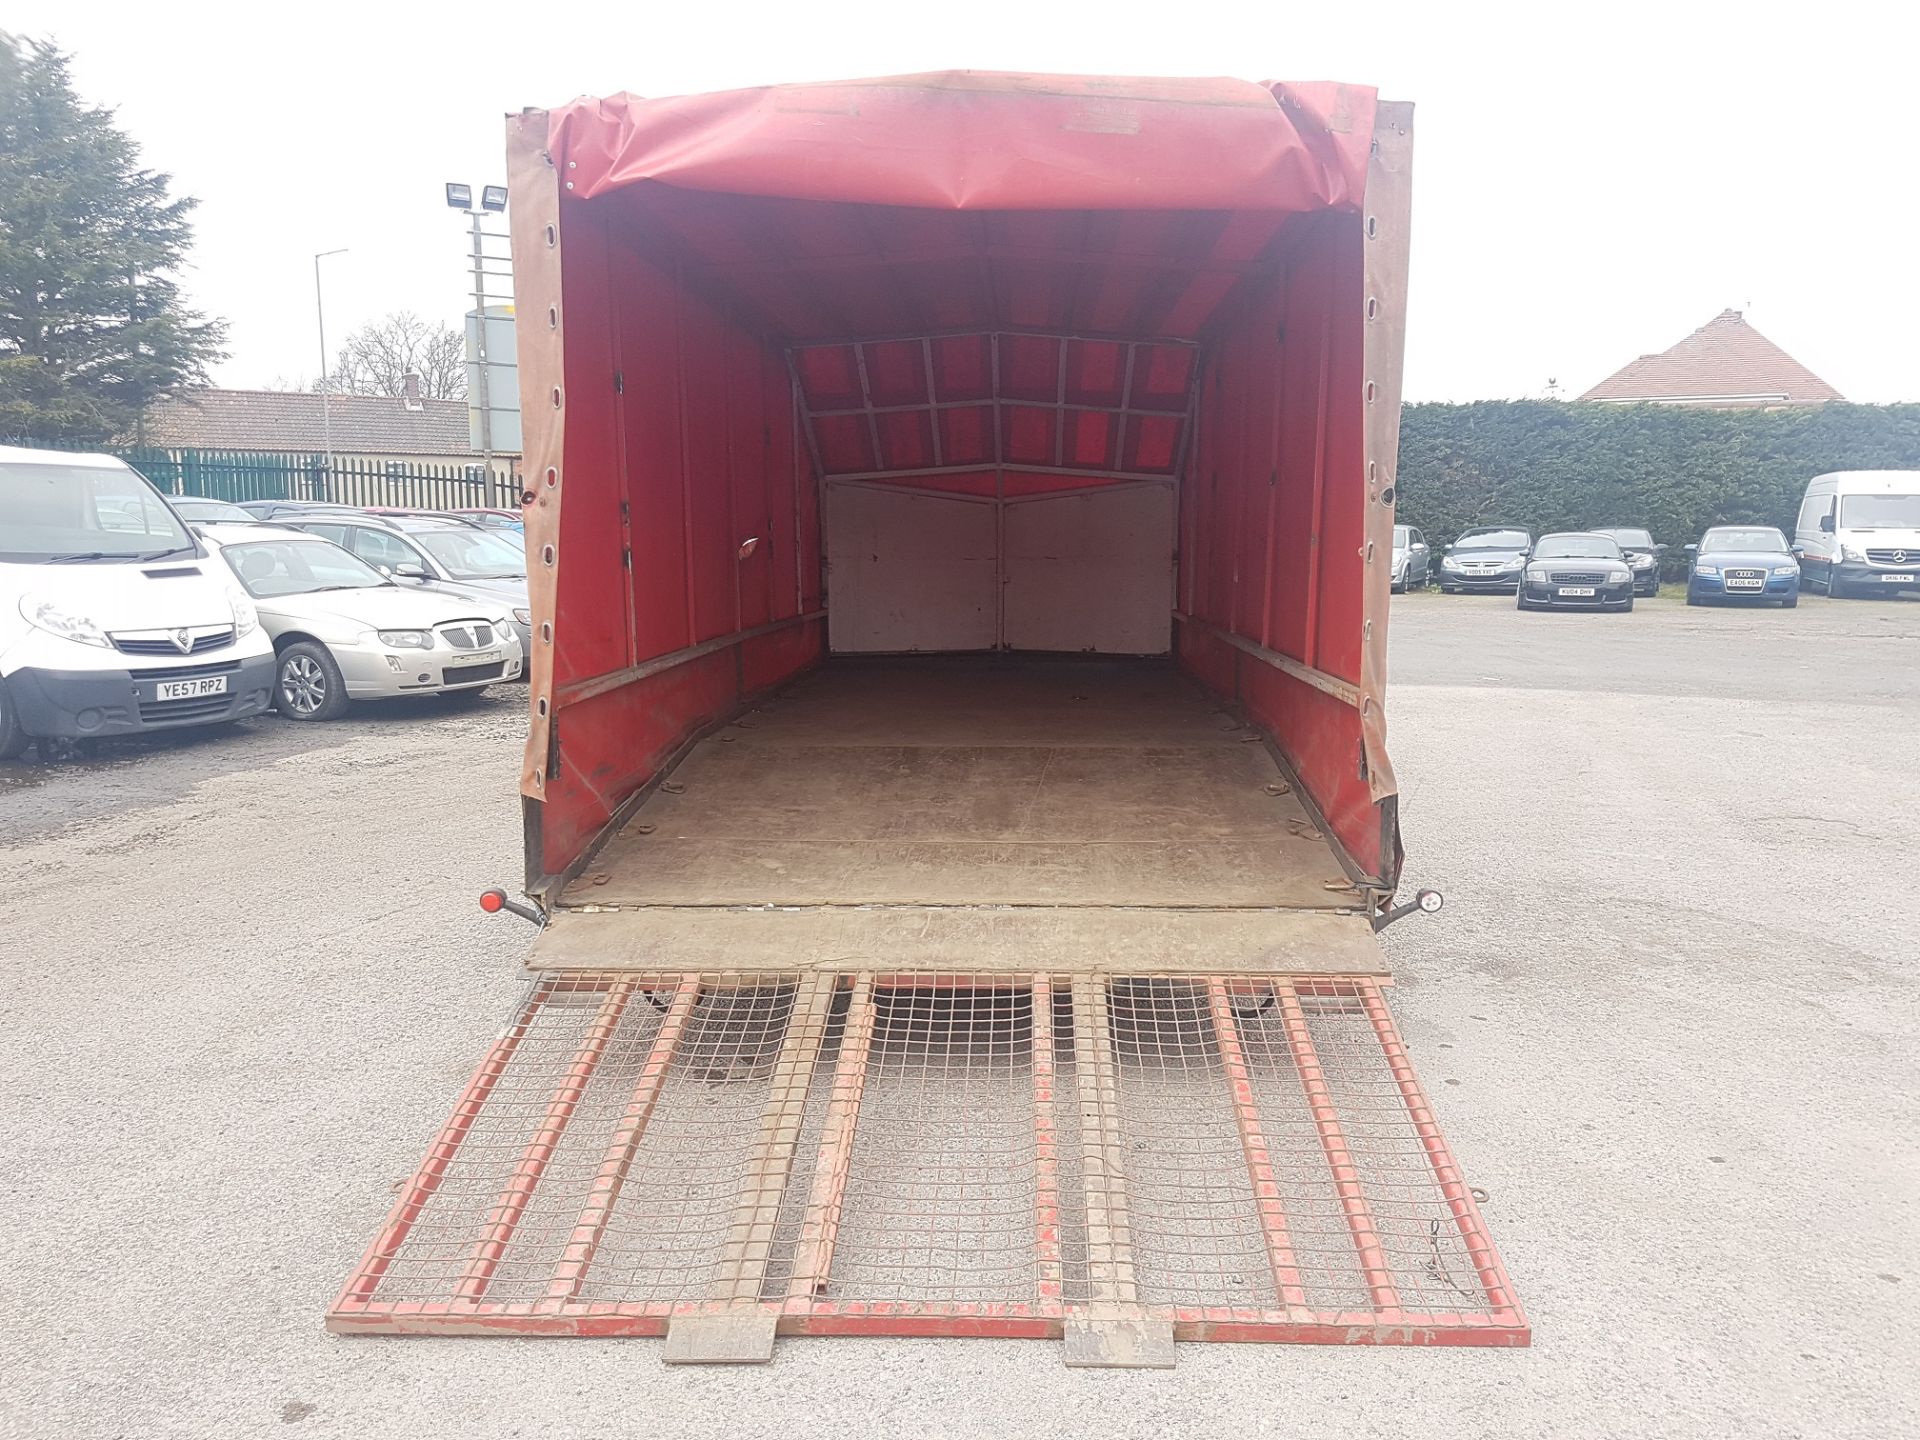 TRI-AXLE BEAVER-TAIL CAR TRANSPORTER COVERED TRAILER - 5.5 METRE BED LENGTH! *PLUS VAT* - Image 9 of 13